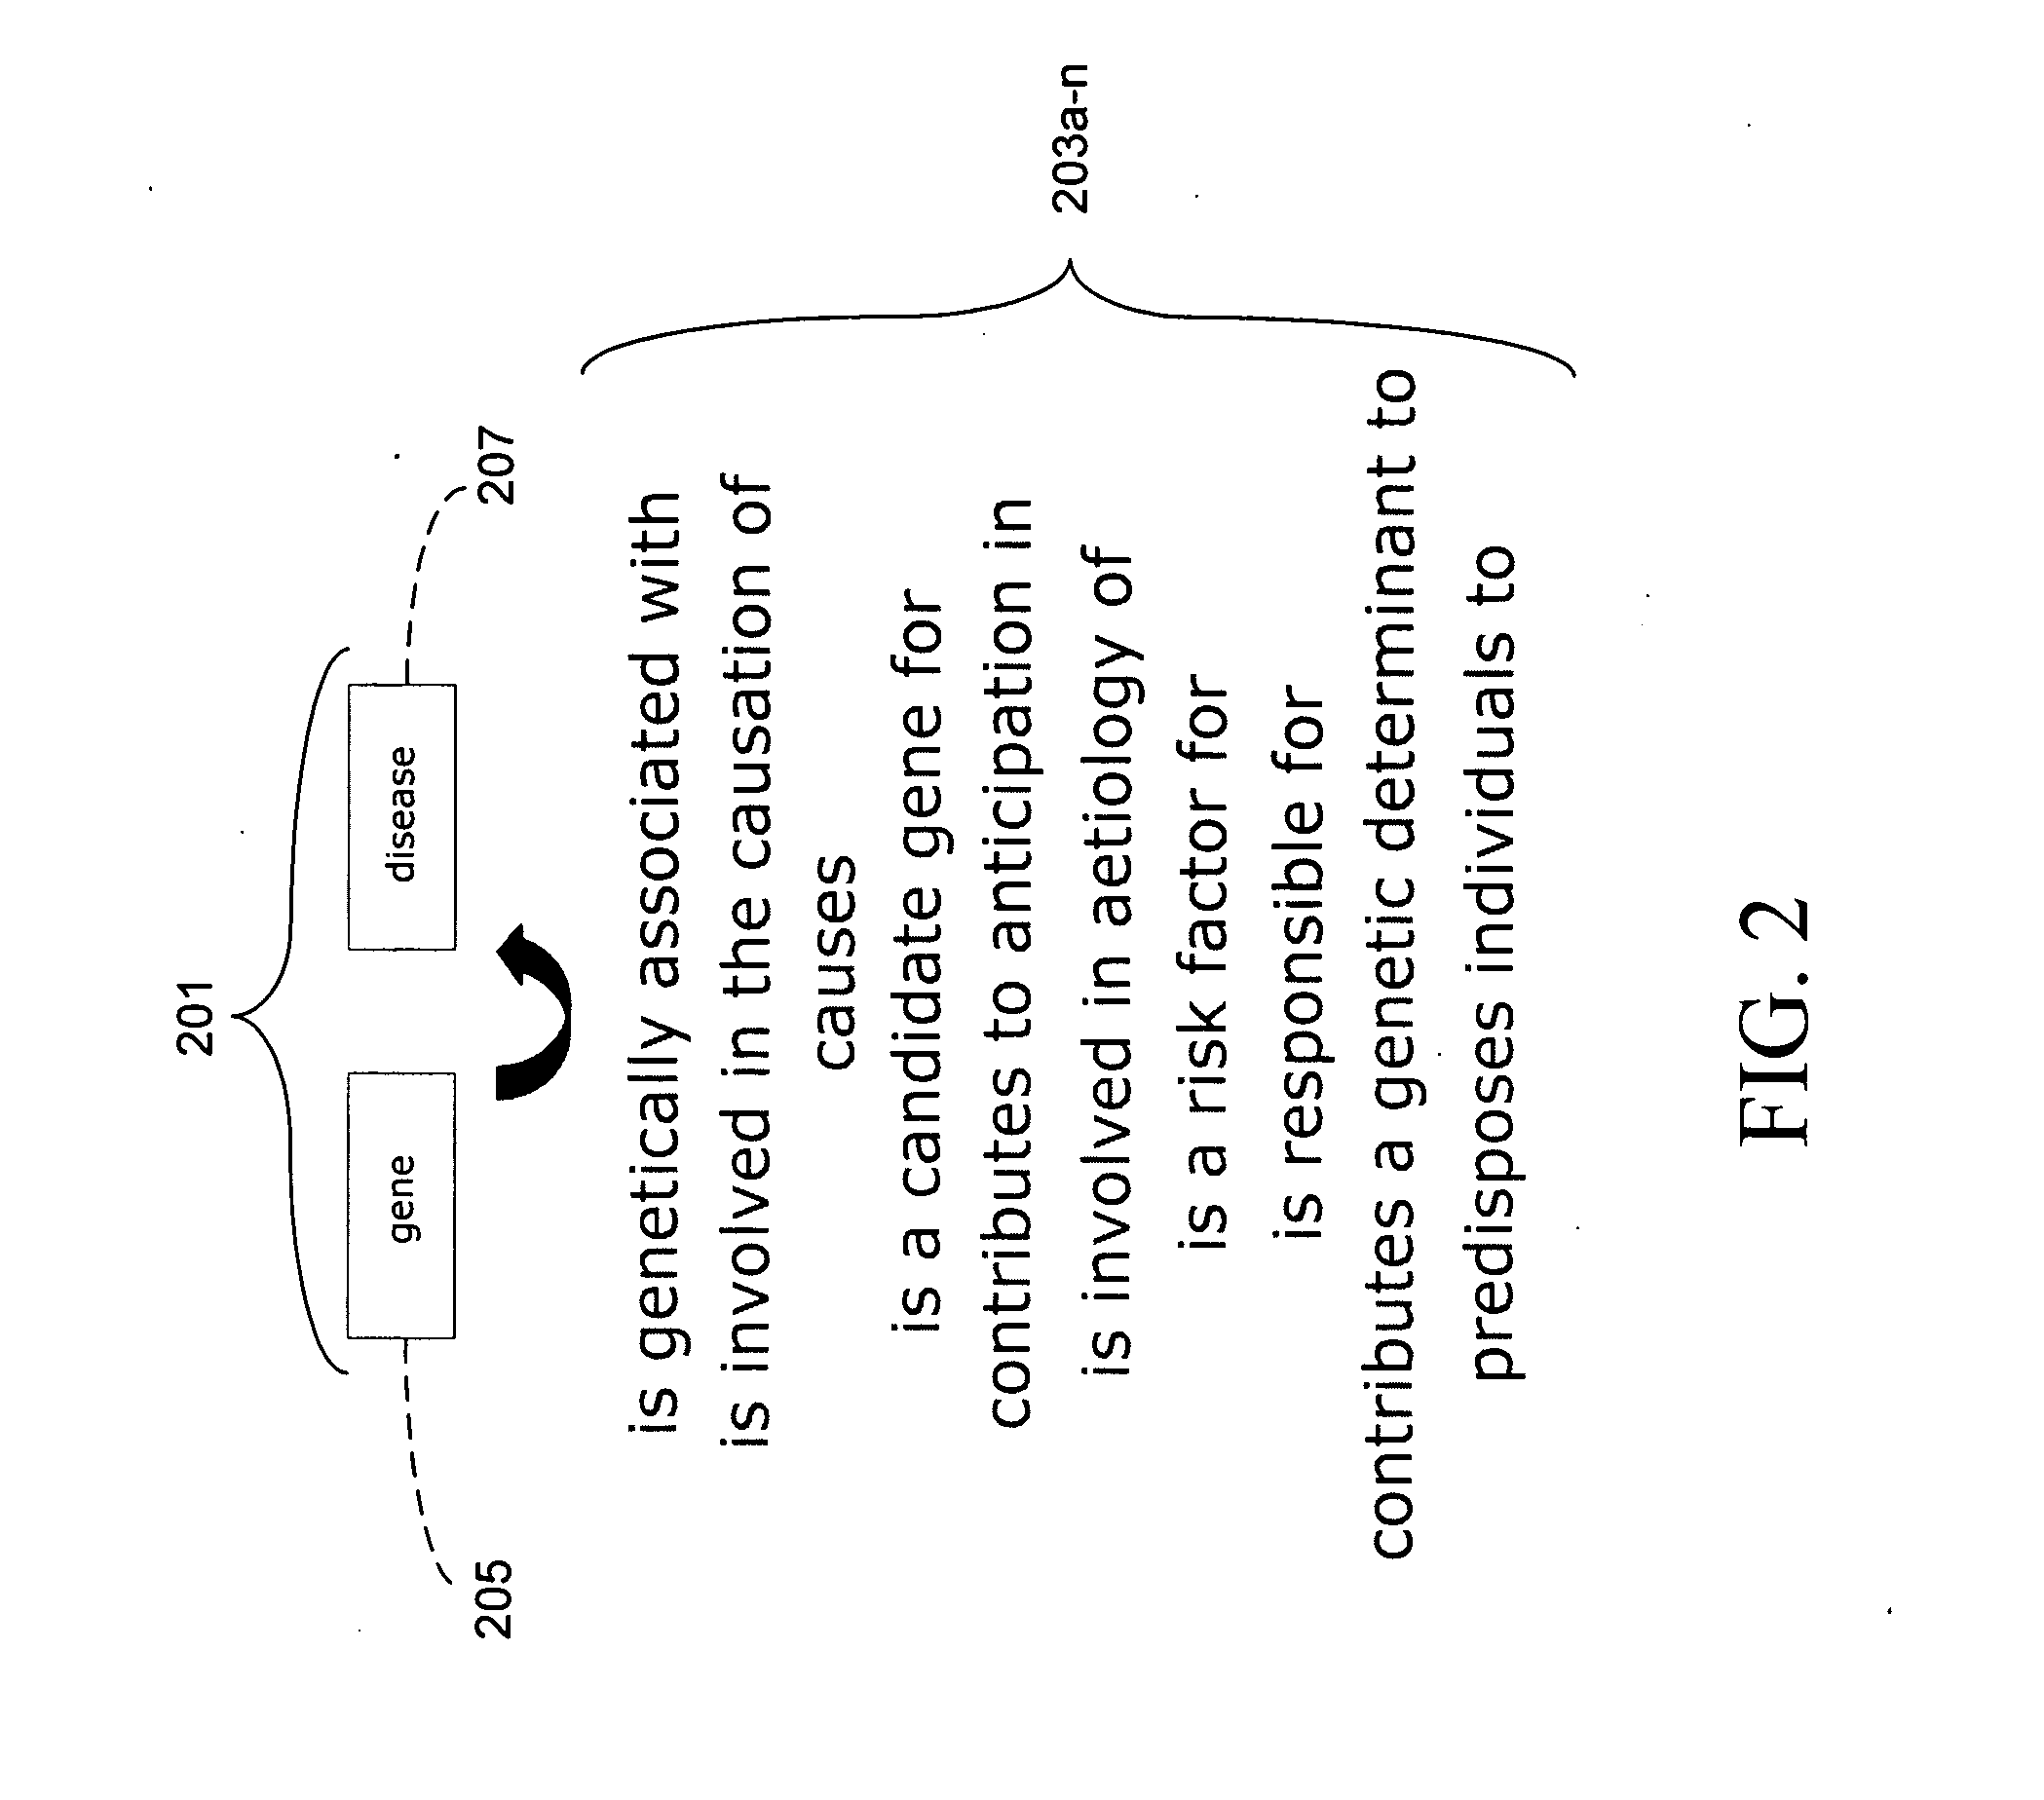 System and method for support of chemical data within multi-relational ontologies